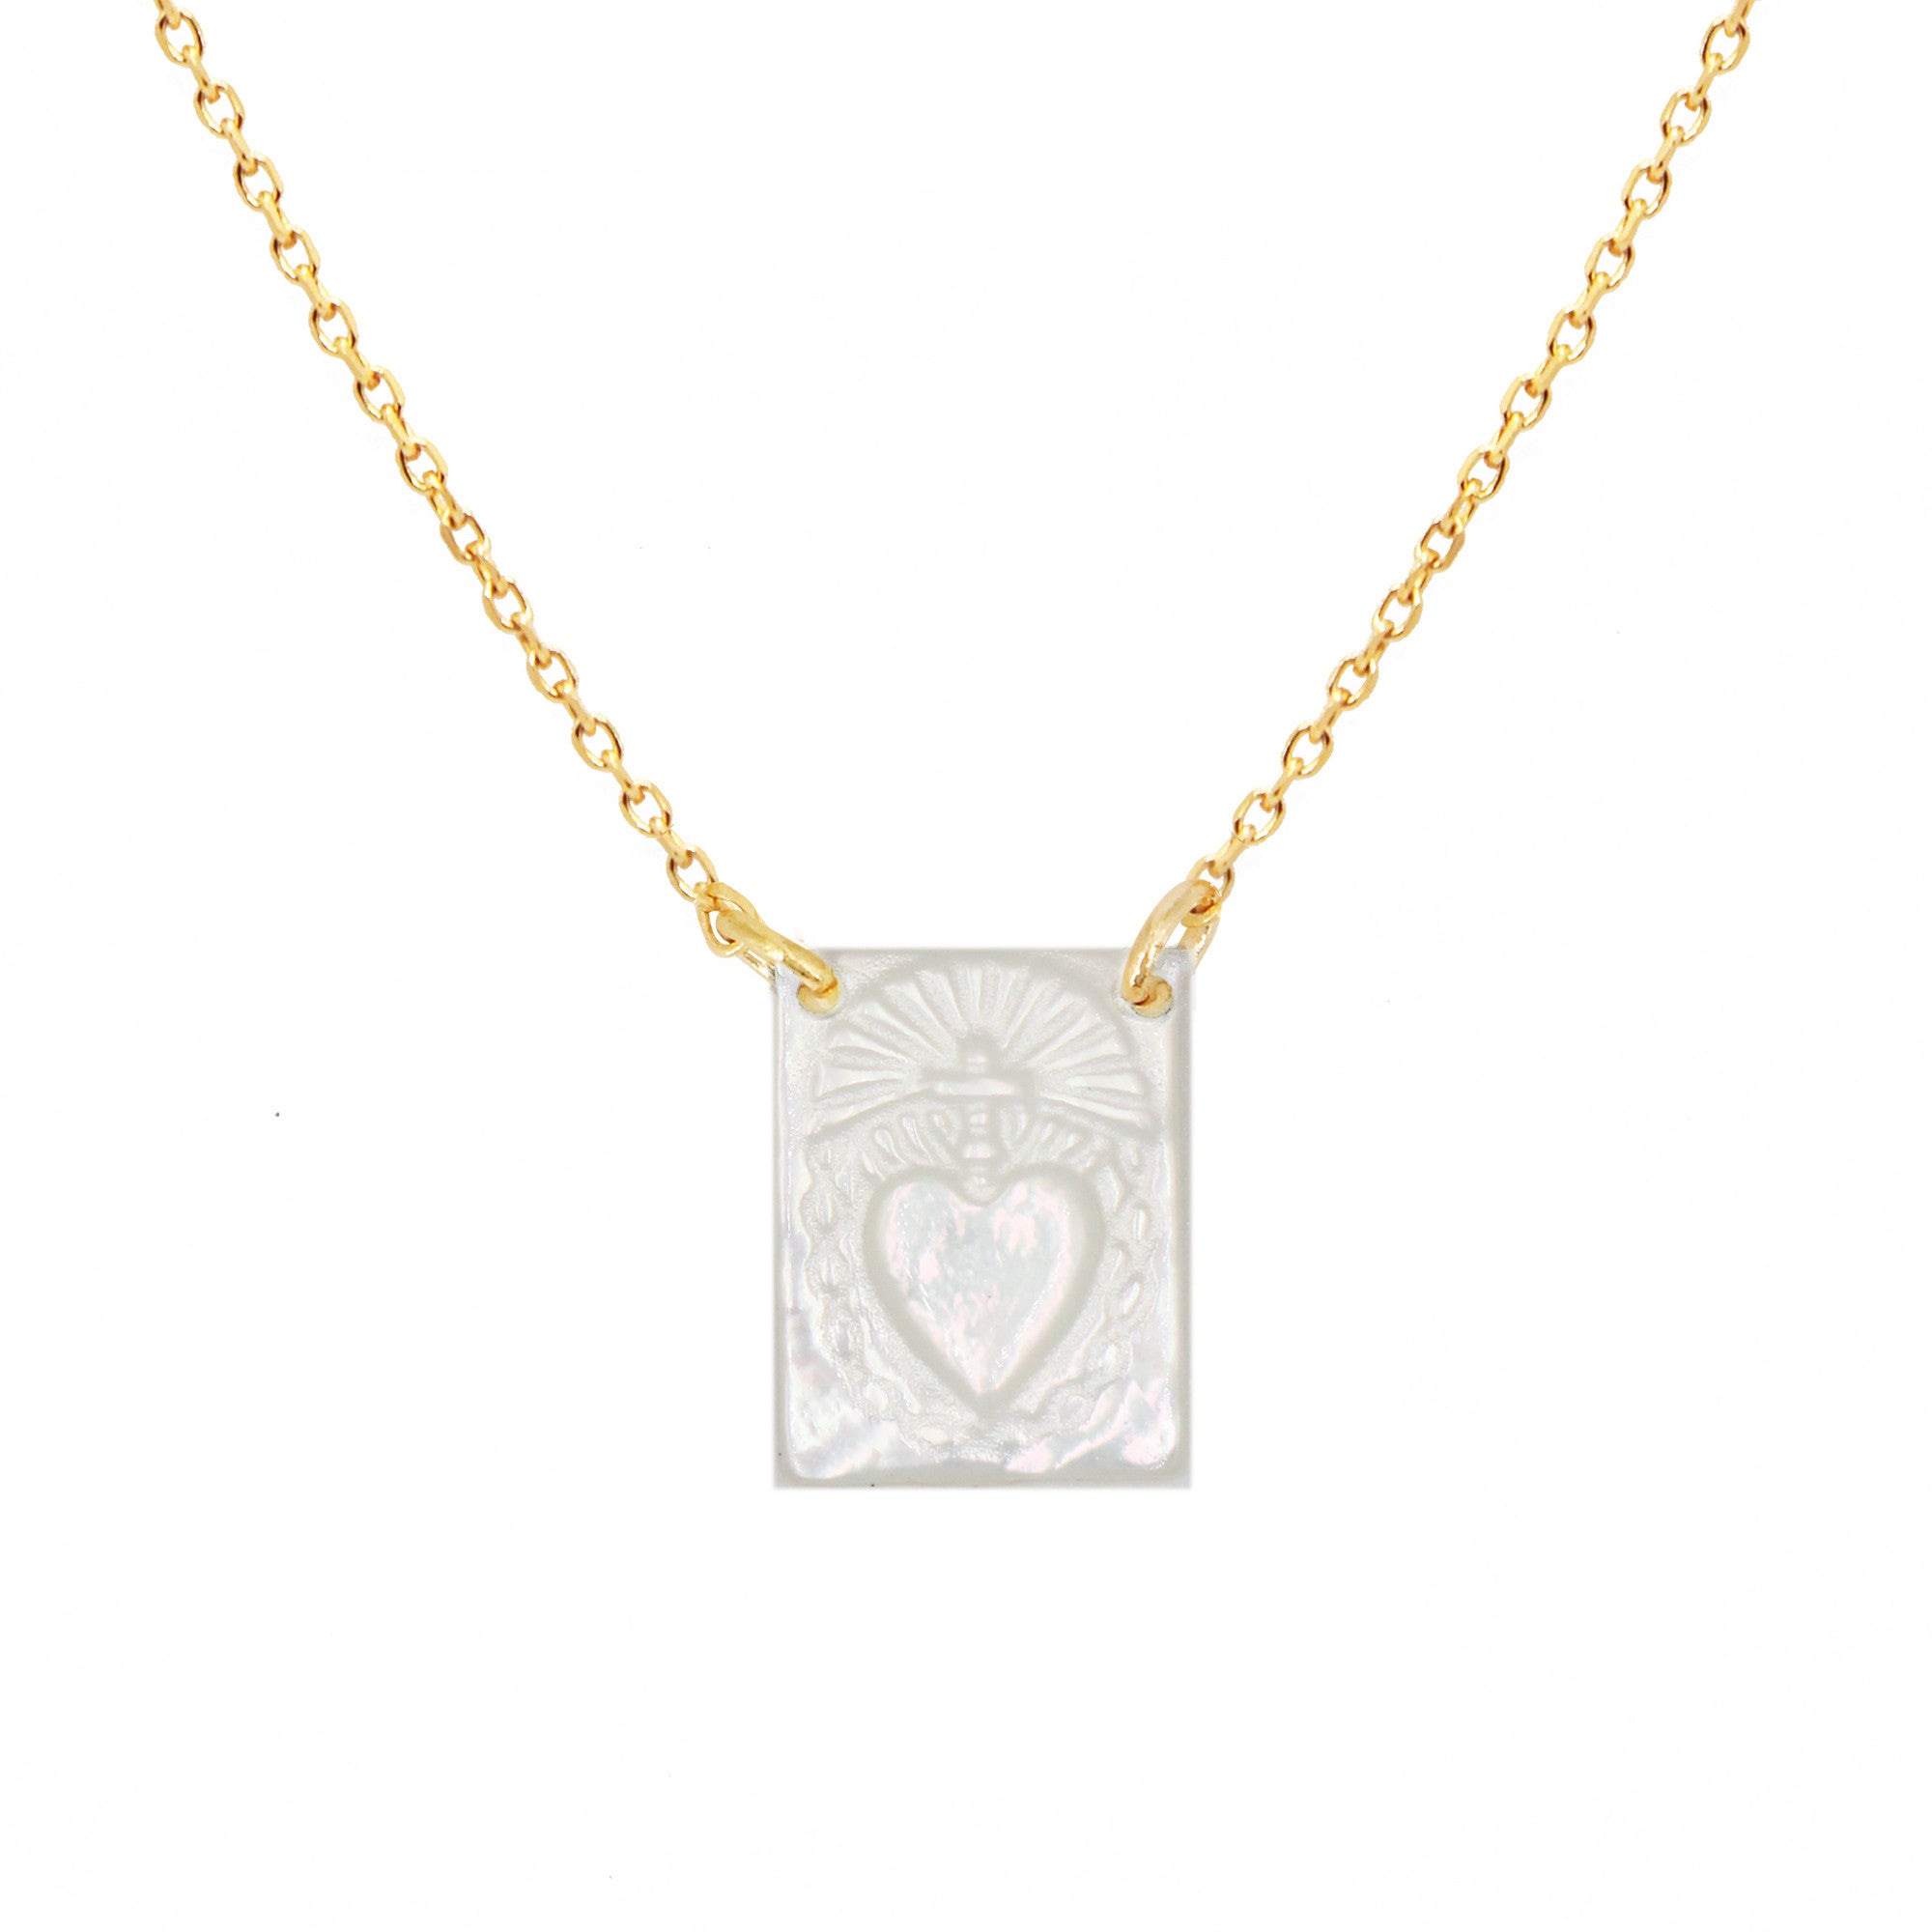 Mother-of-pearl ex voto necklace